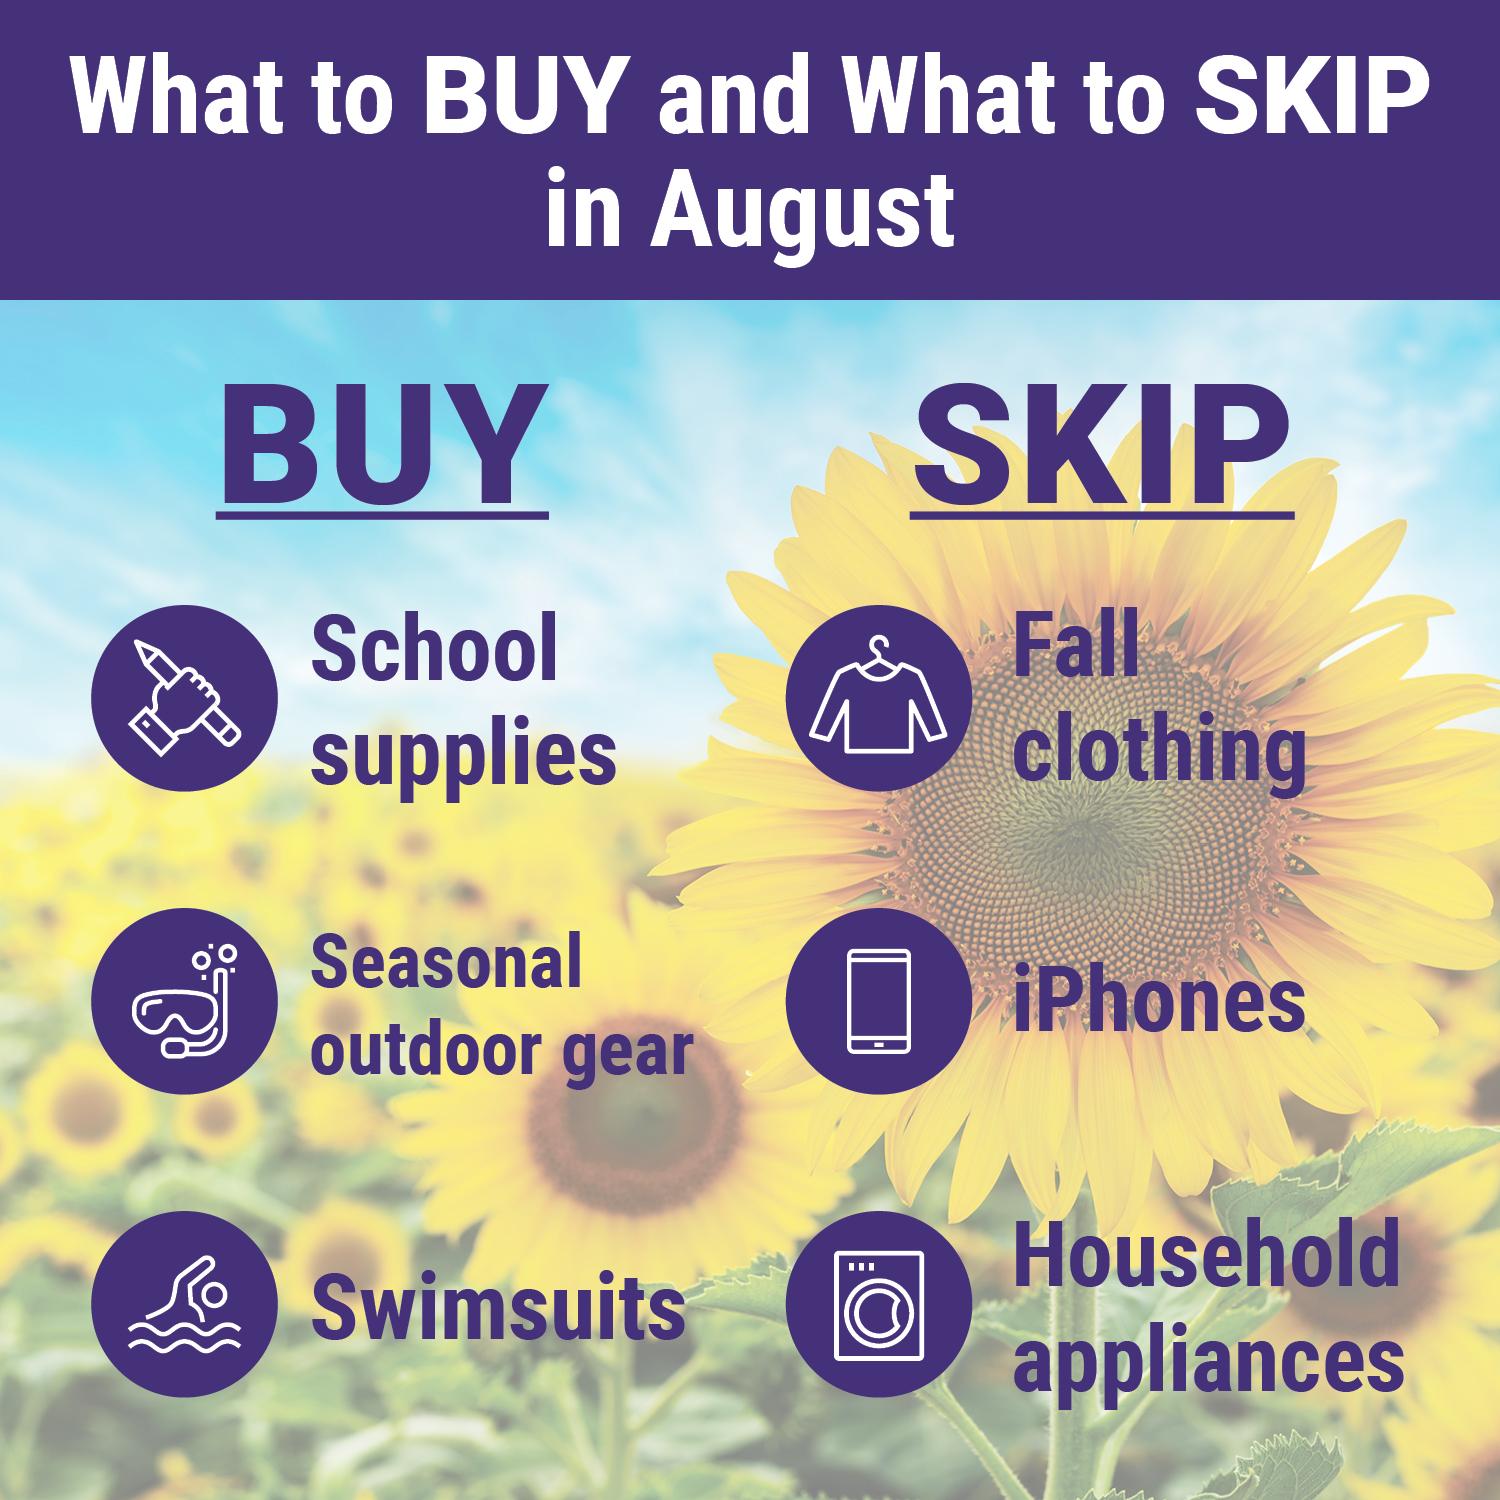 What to buy and skip in August